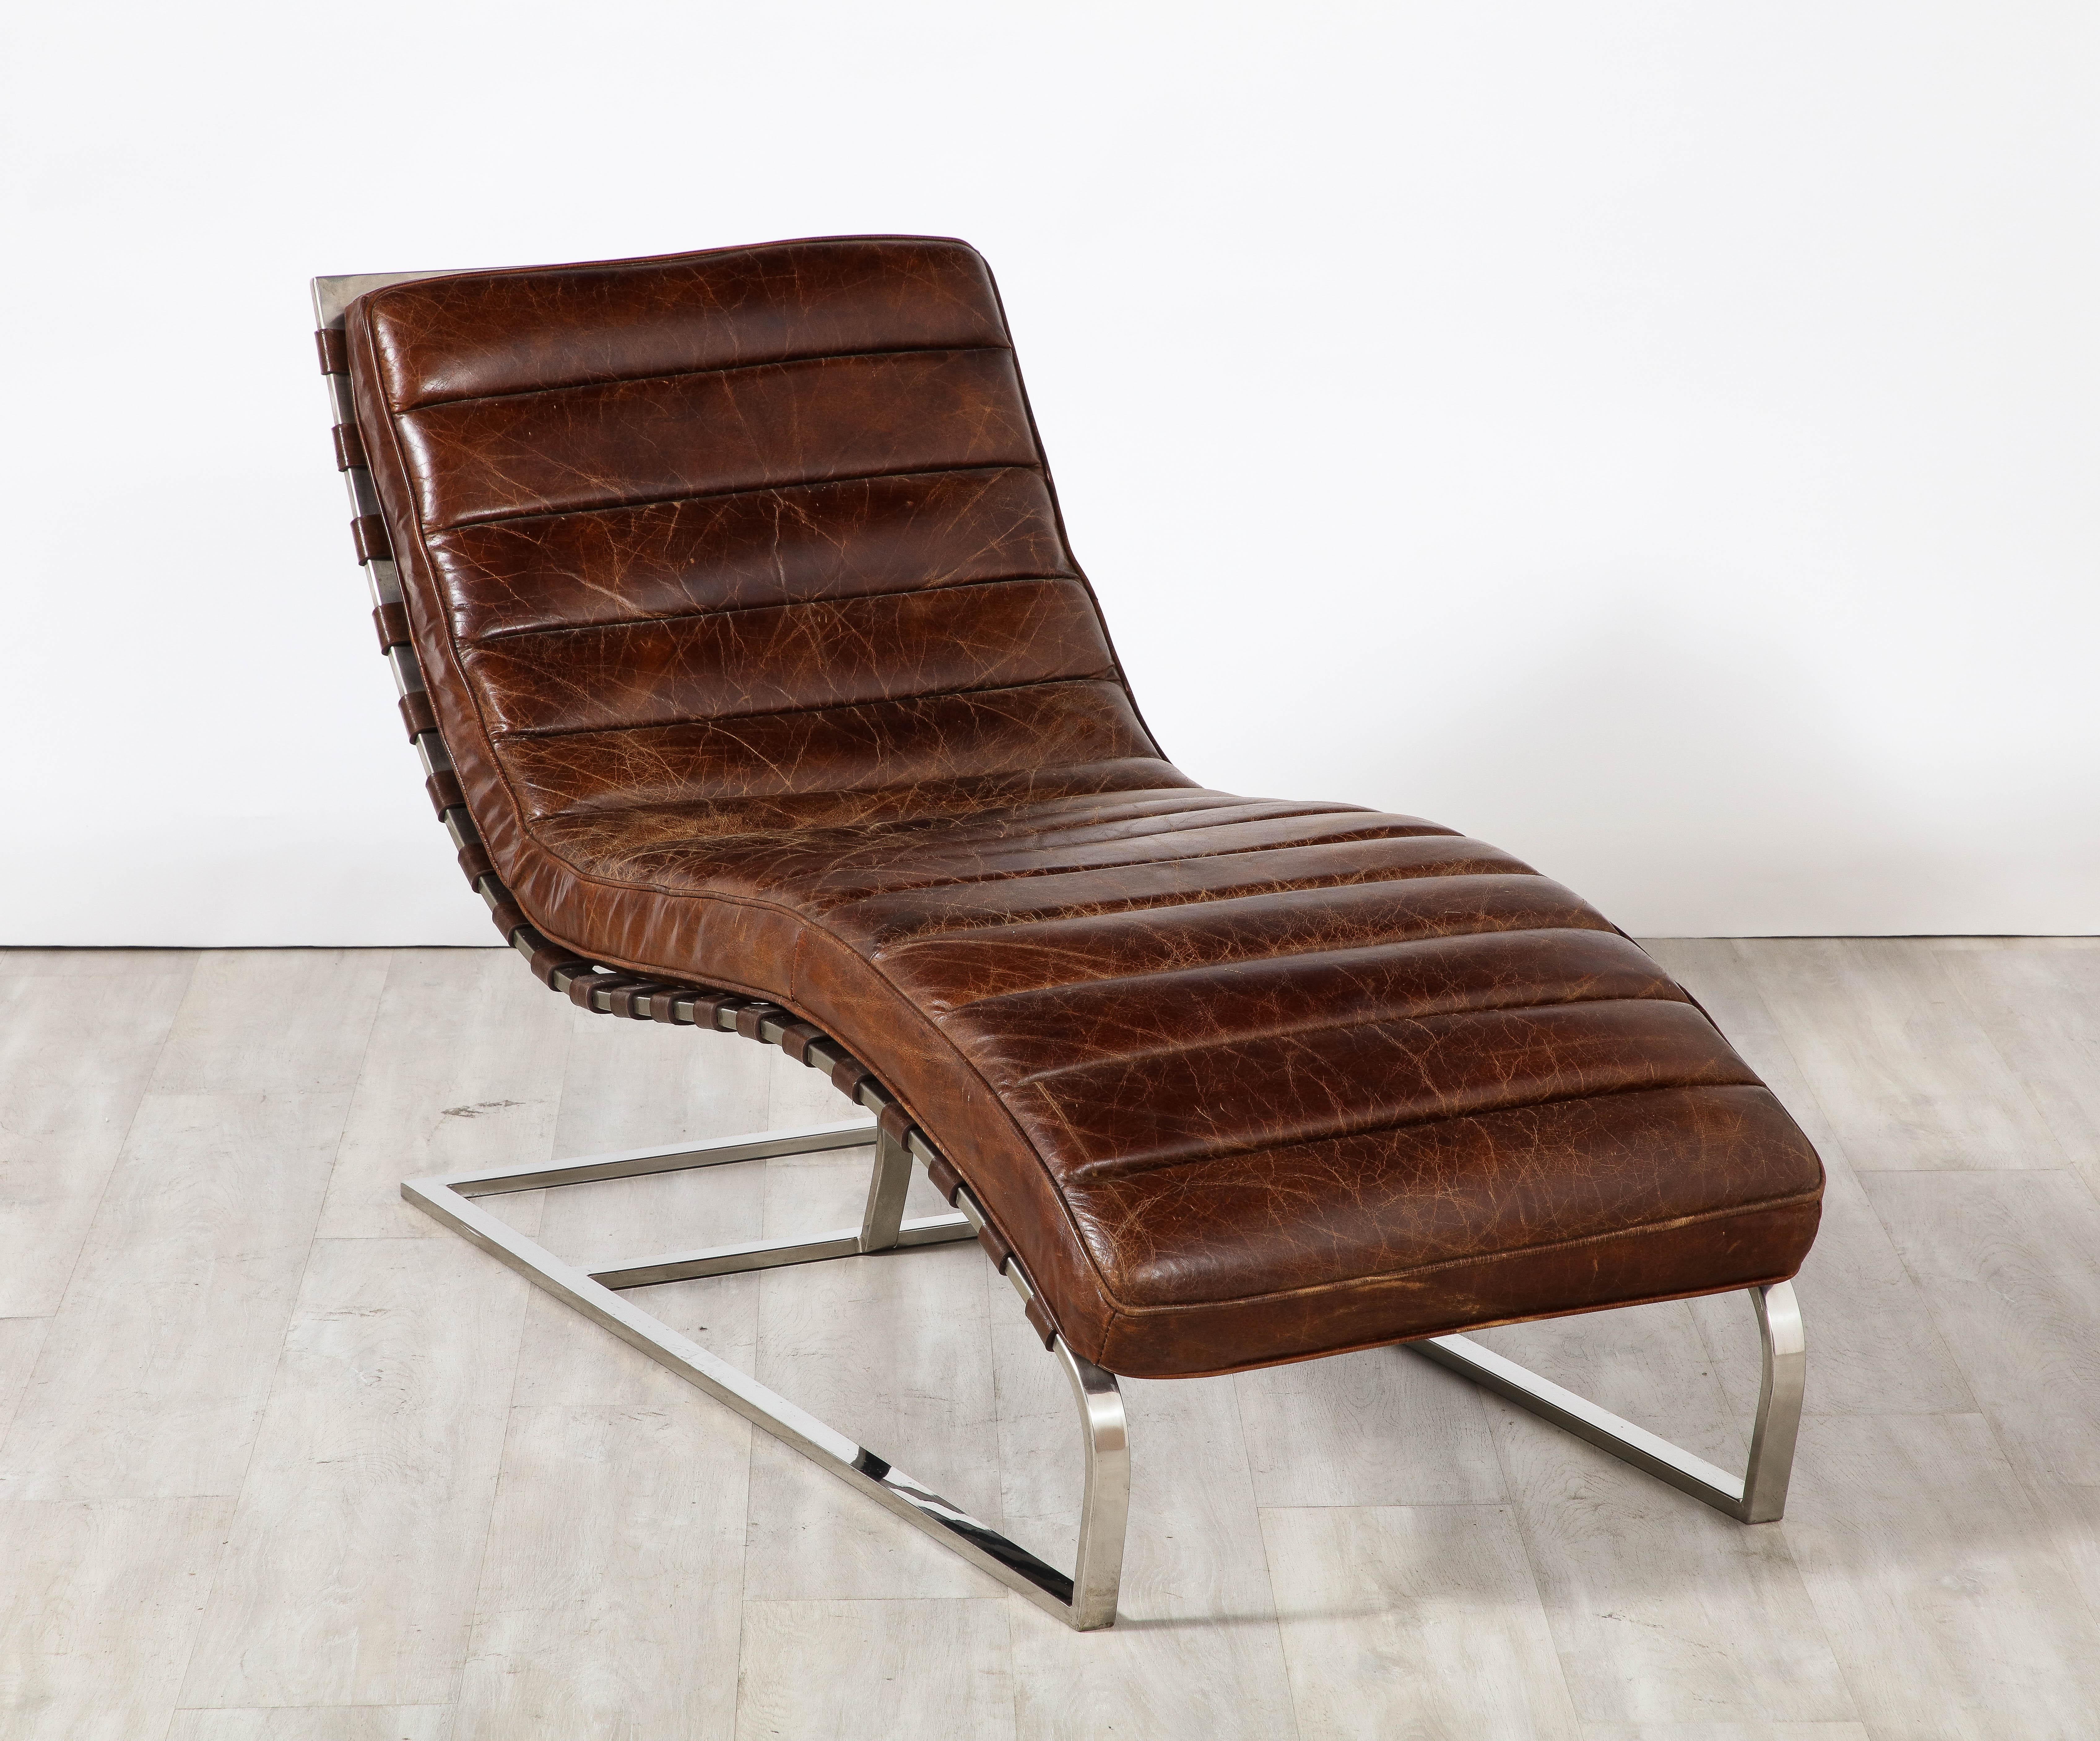 Italian Channeled Leather and Chrome Chaise Longue, 1970 For Sale 6